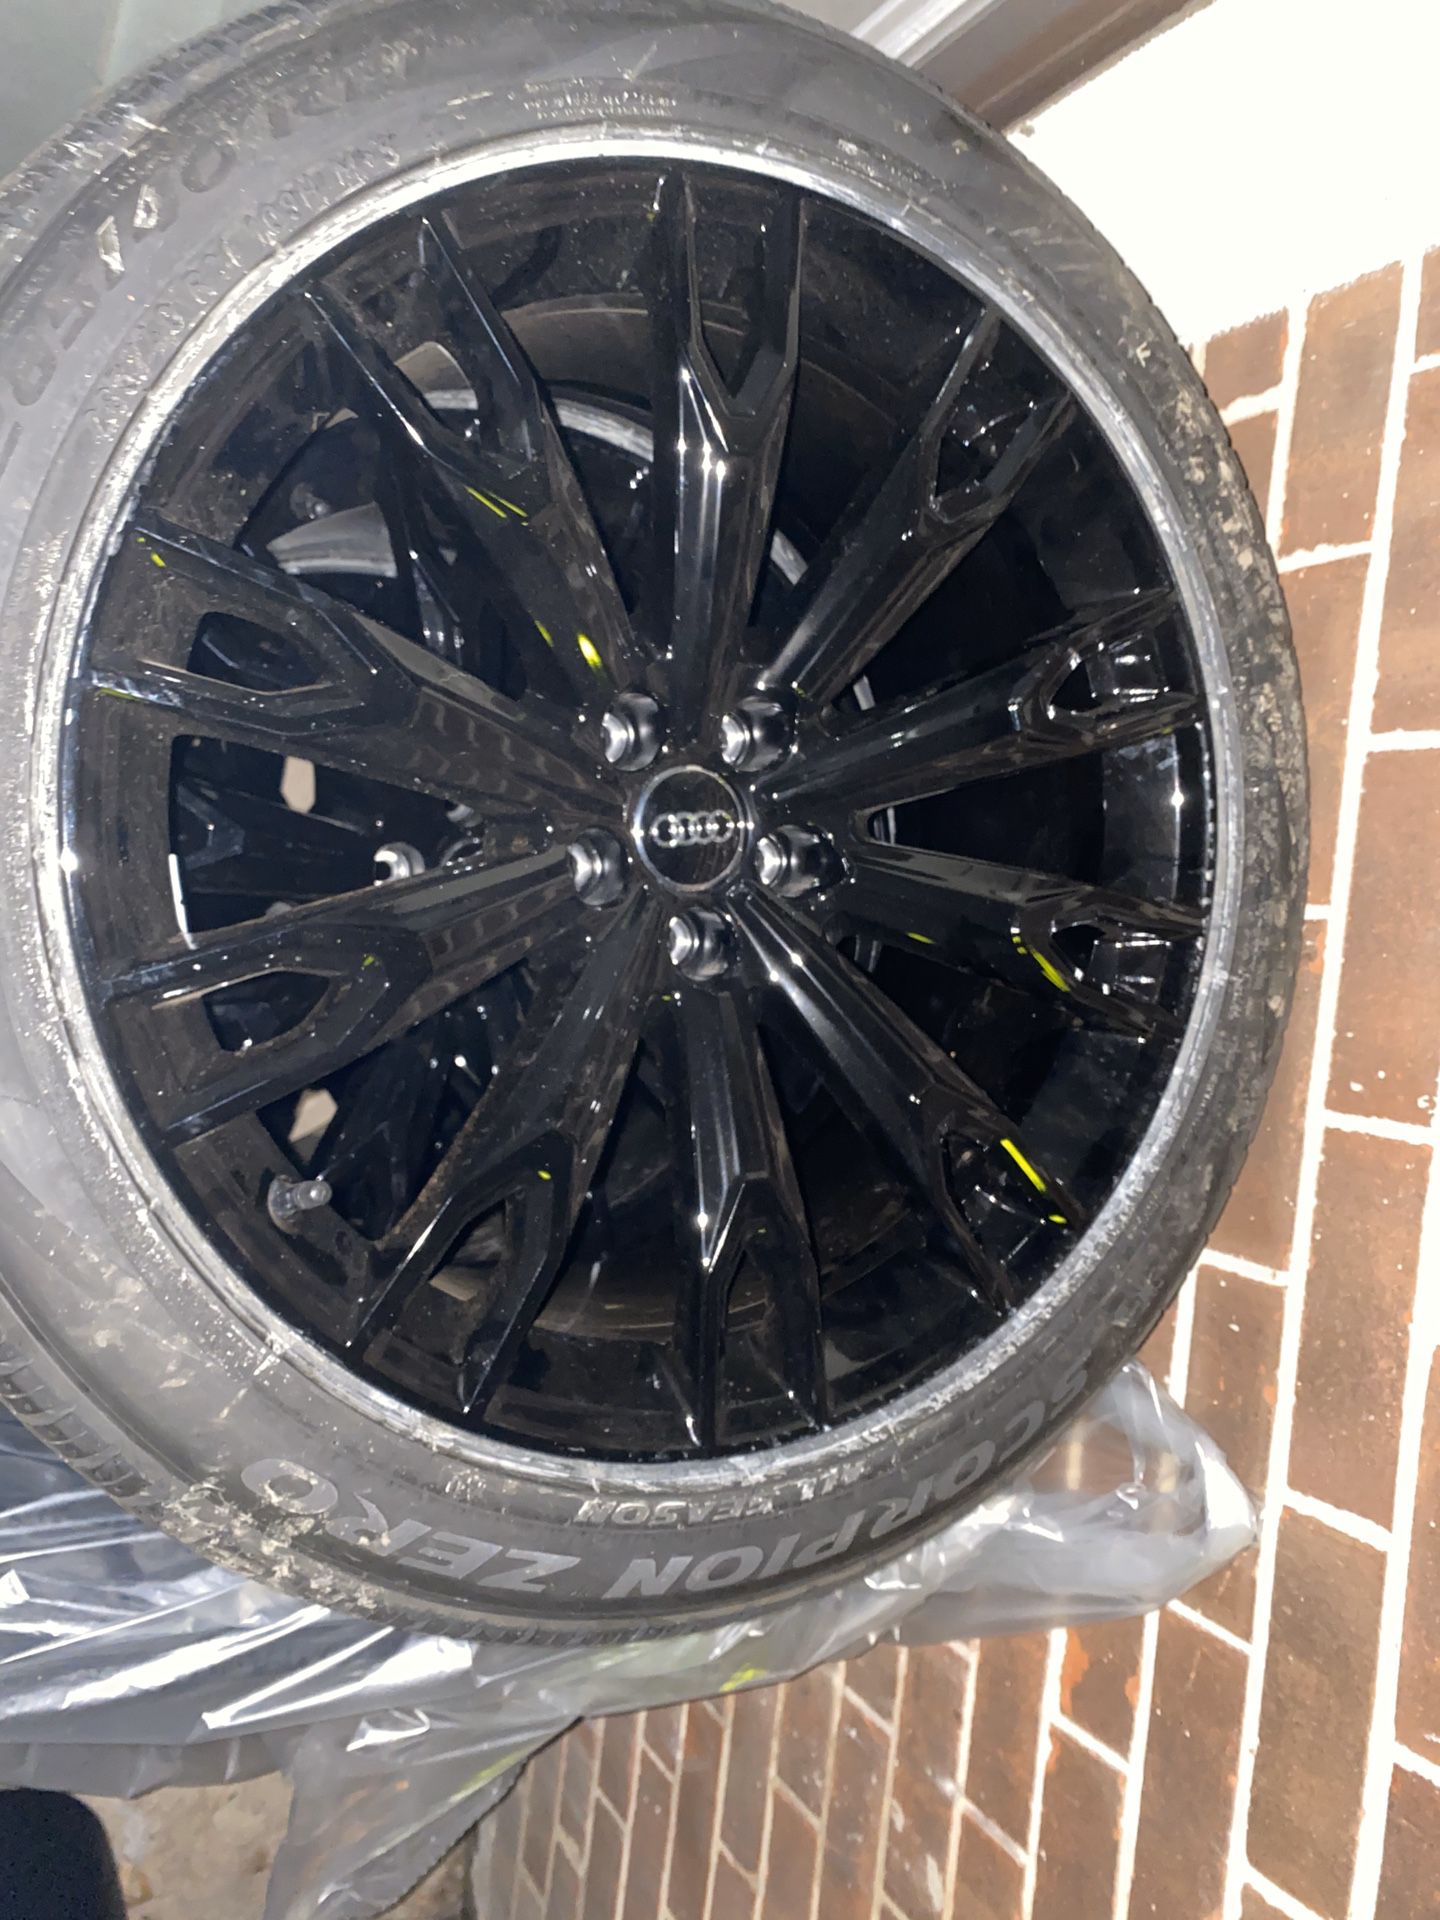 Brand new Audi Q7 wheels and tires